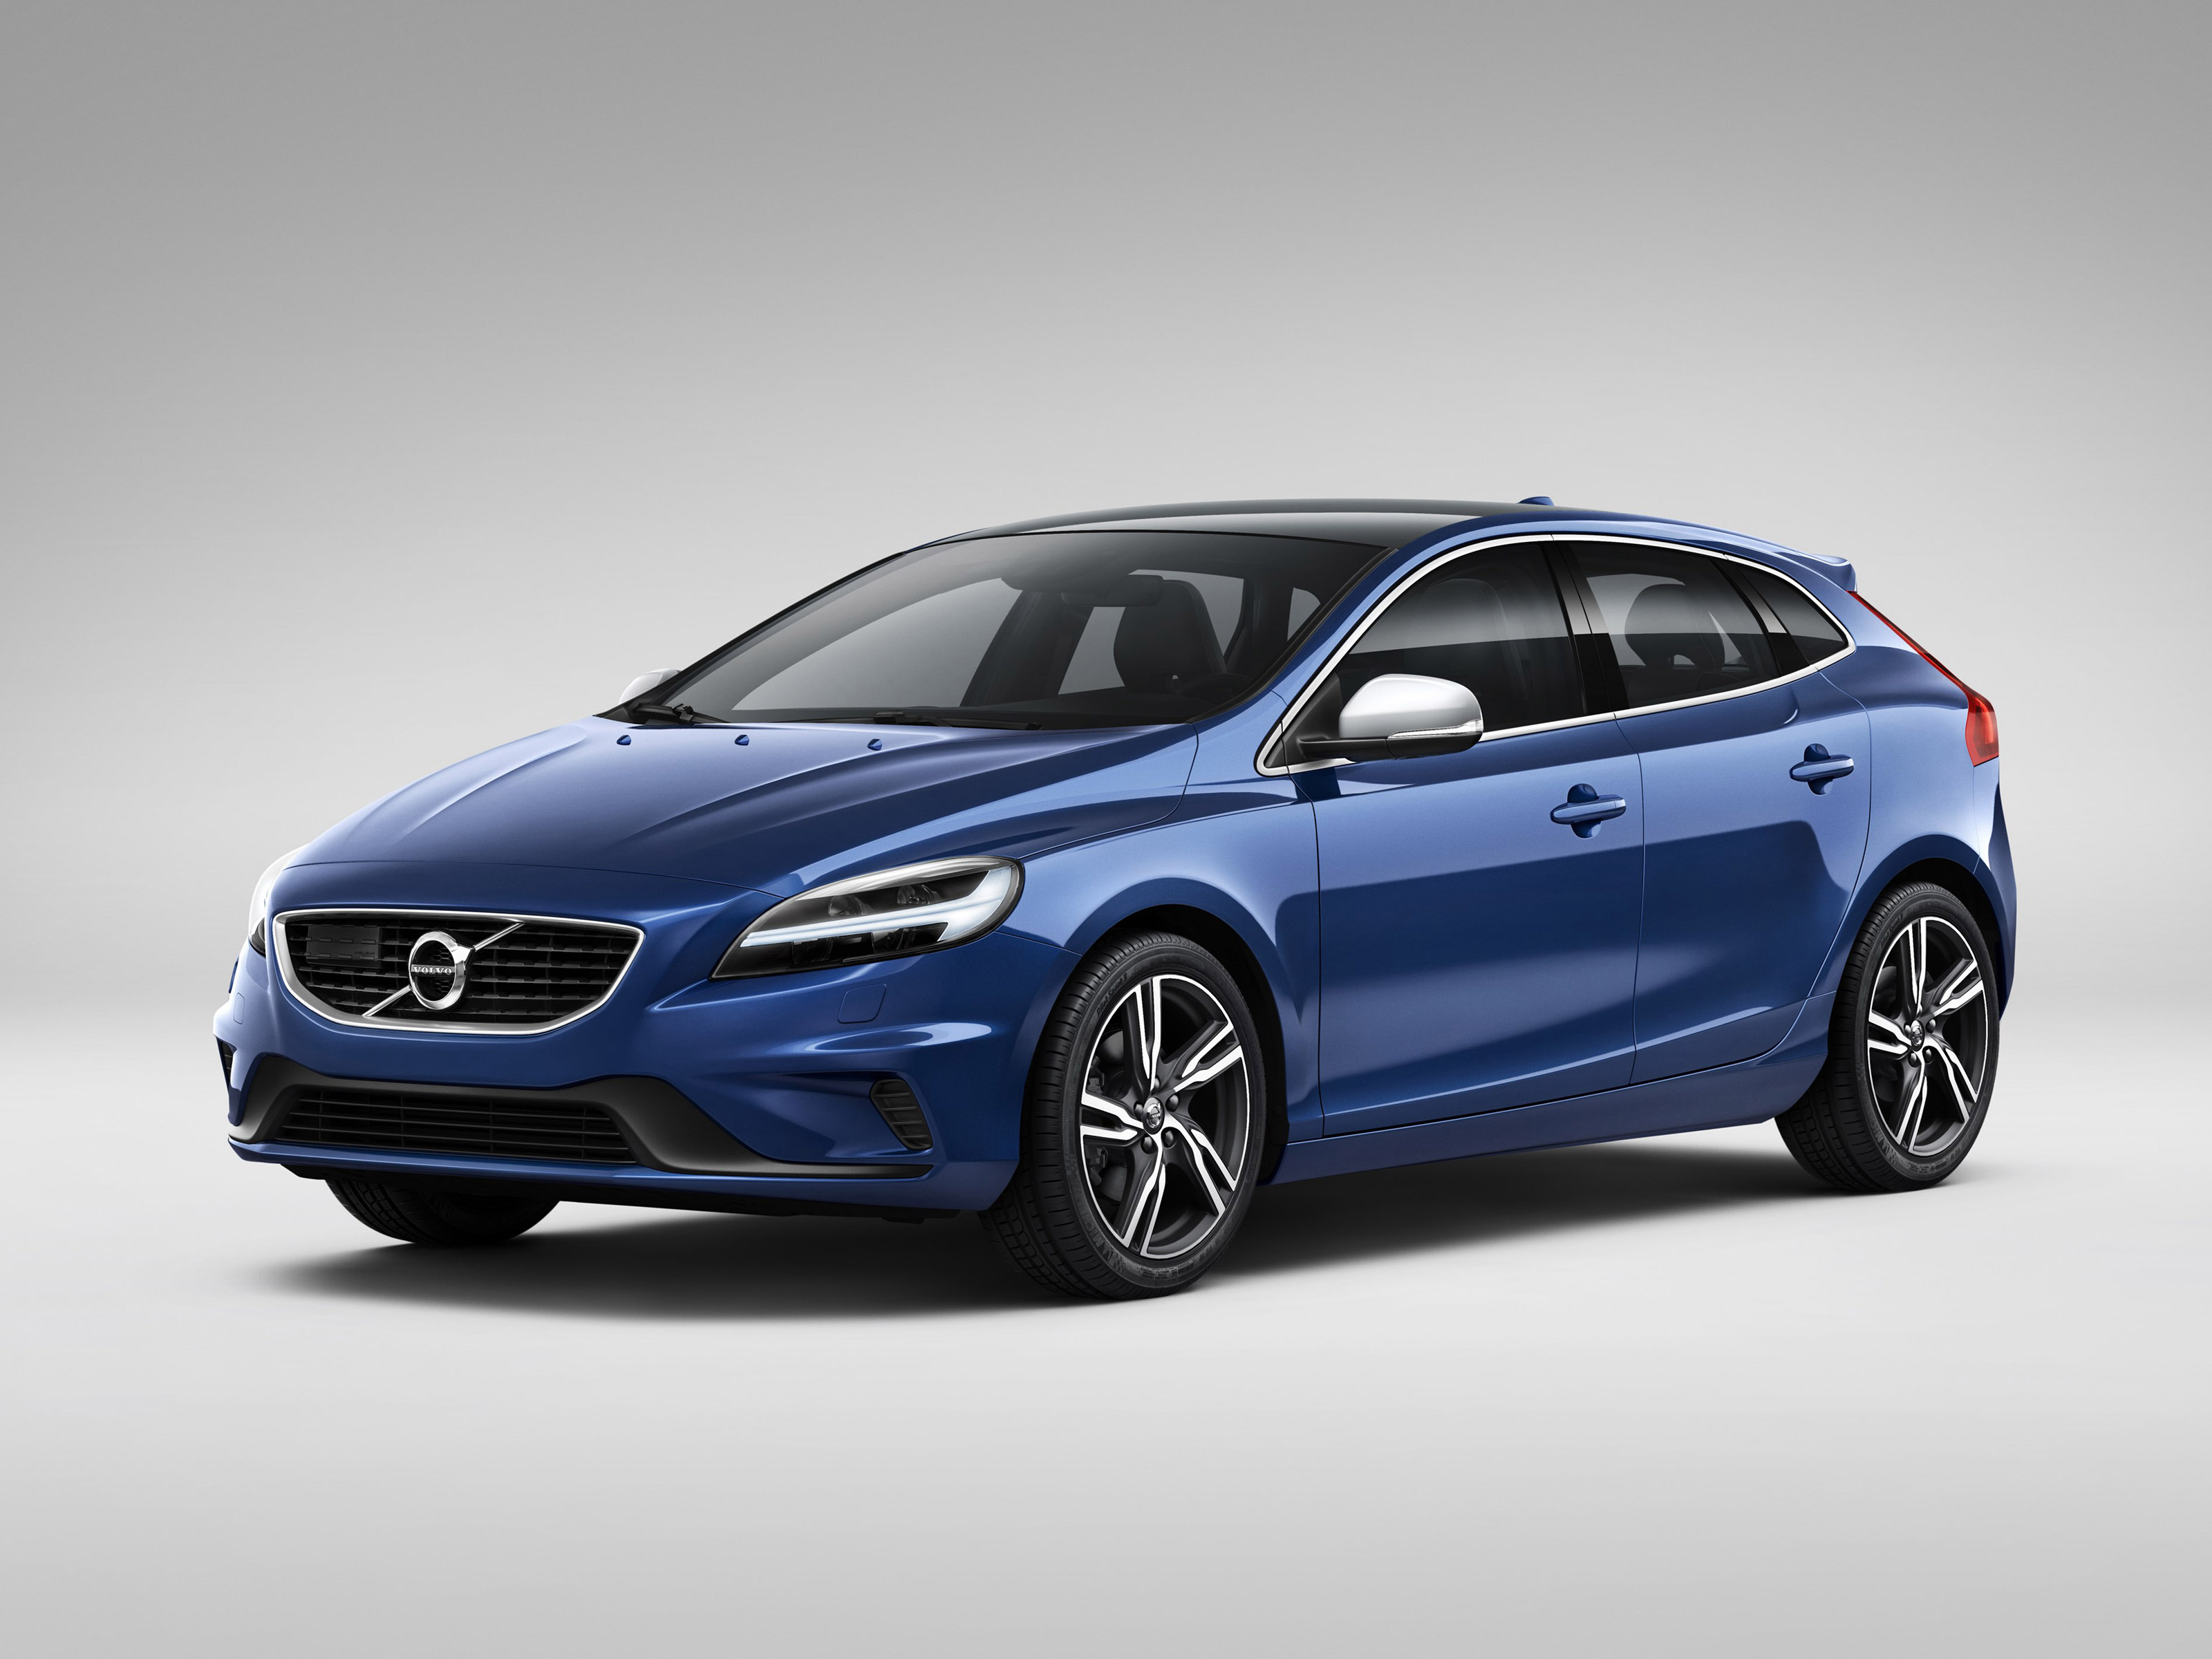 Volvo V40 accessories specifications